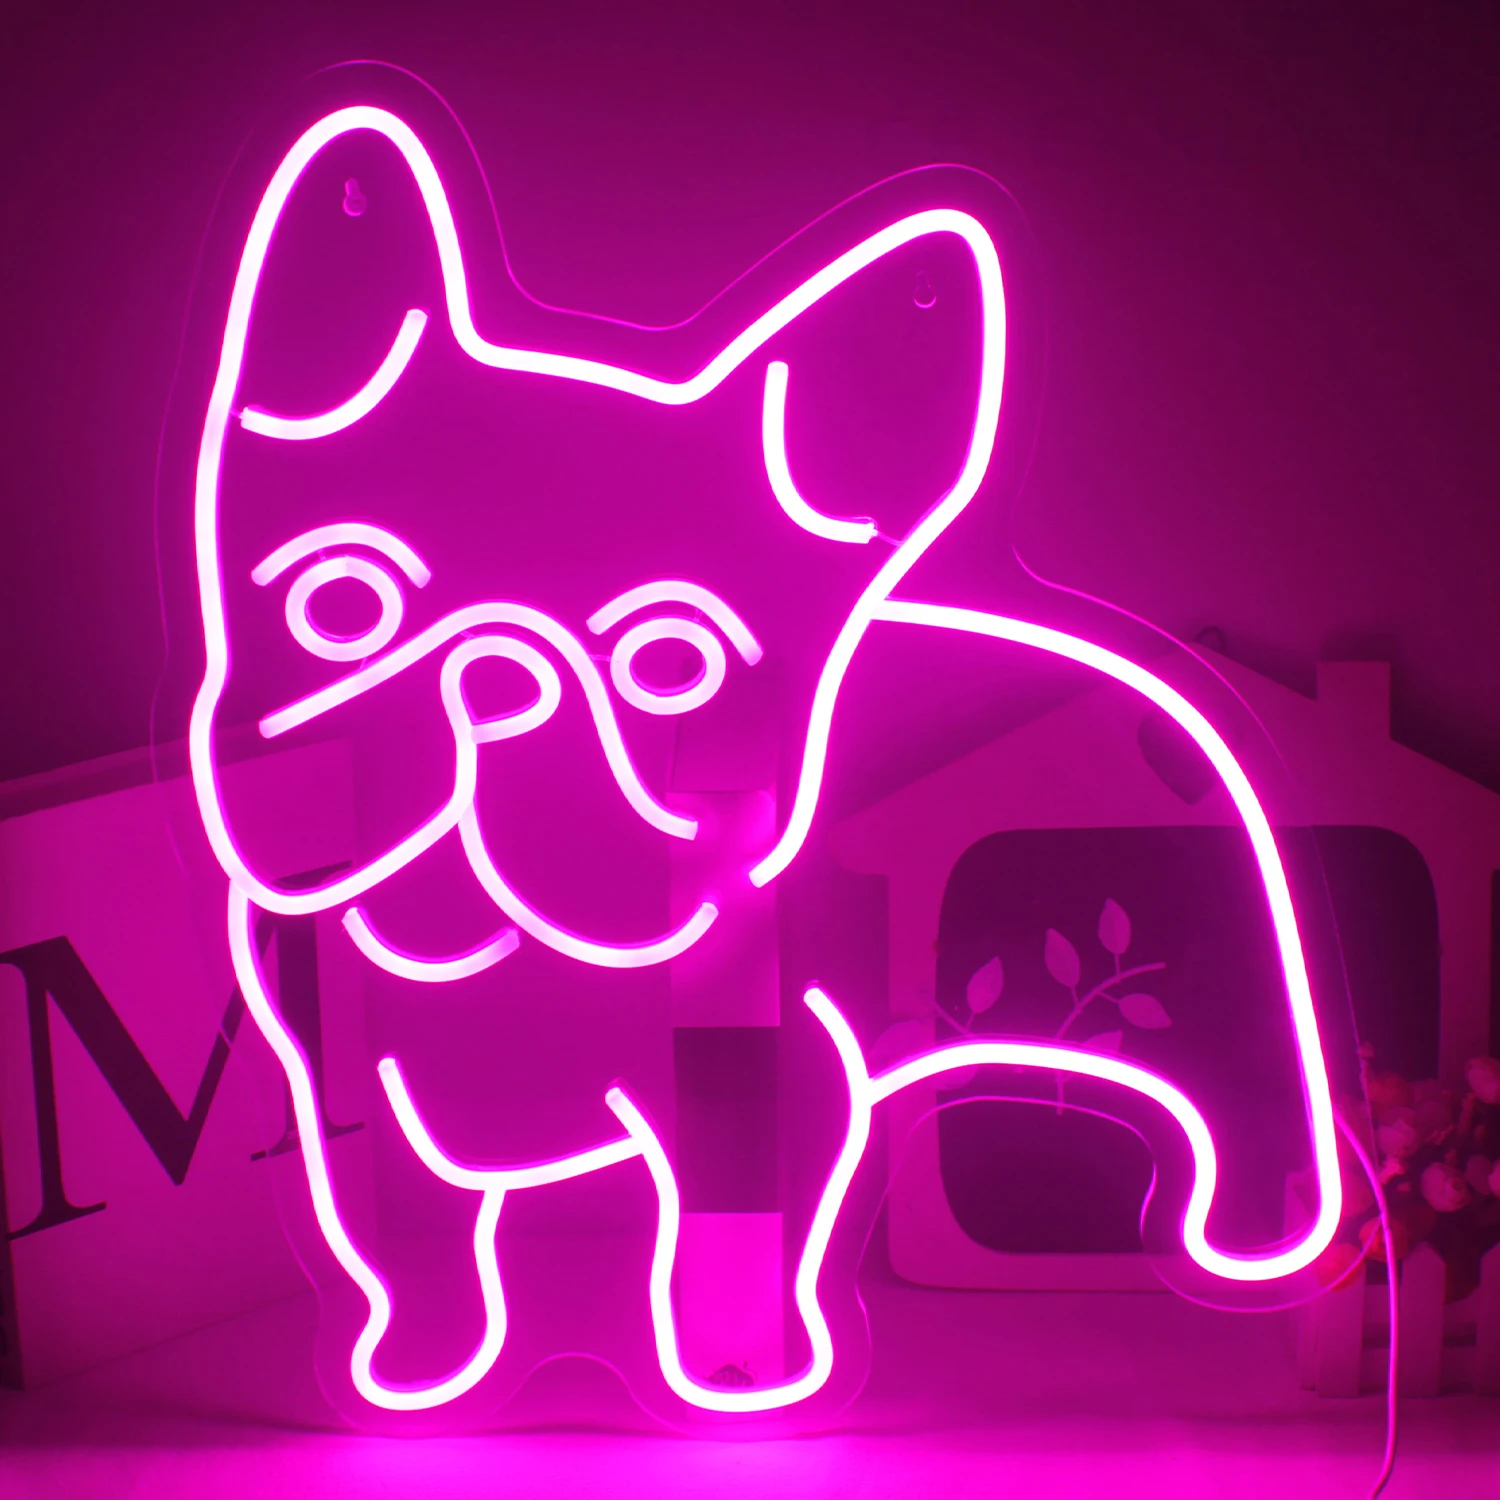 Wanxing Neon Light Cute Pink Dog Neon Mural Sign Wall Hanging Light For Sports Room Decor Club Wedding Party Bar Xmas Gift